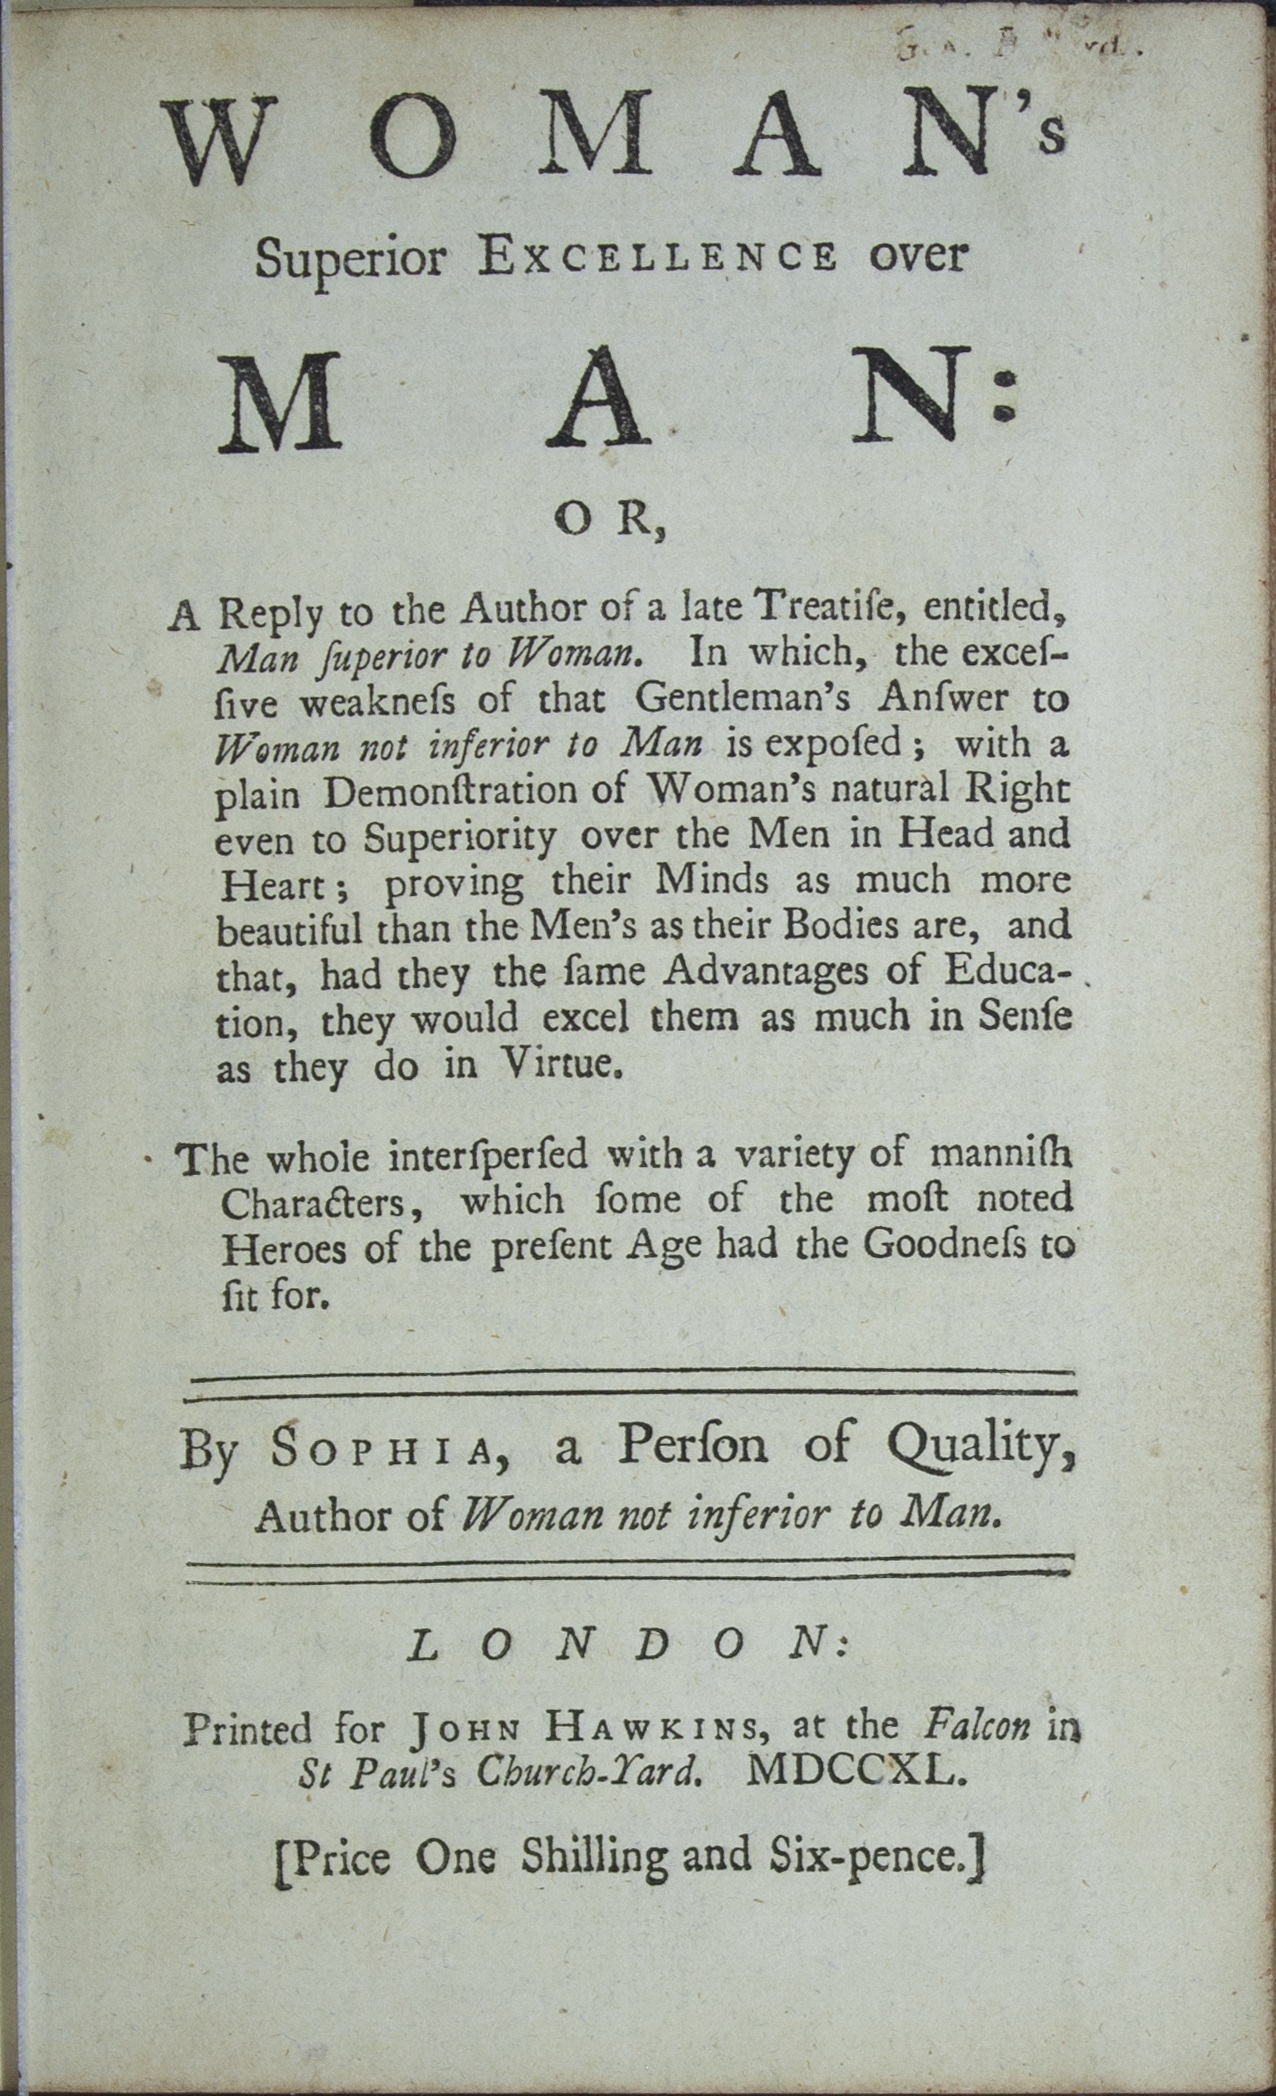 Title page of Woman' Superior Excellence over Man